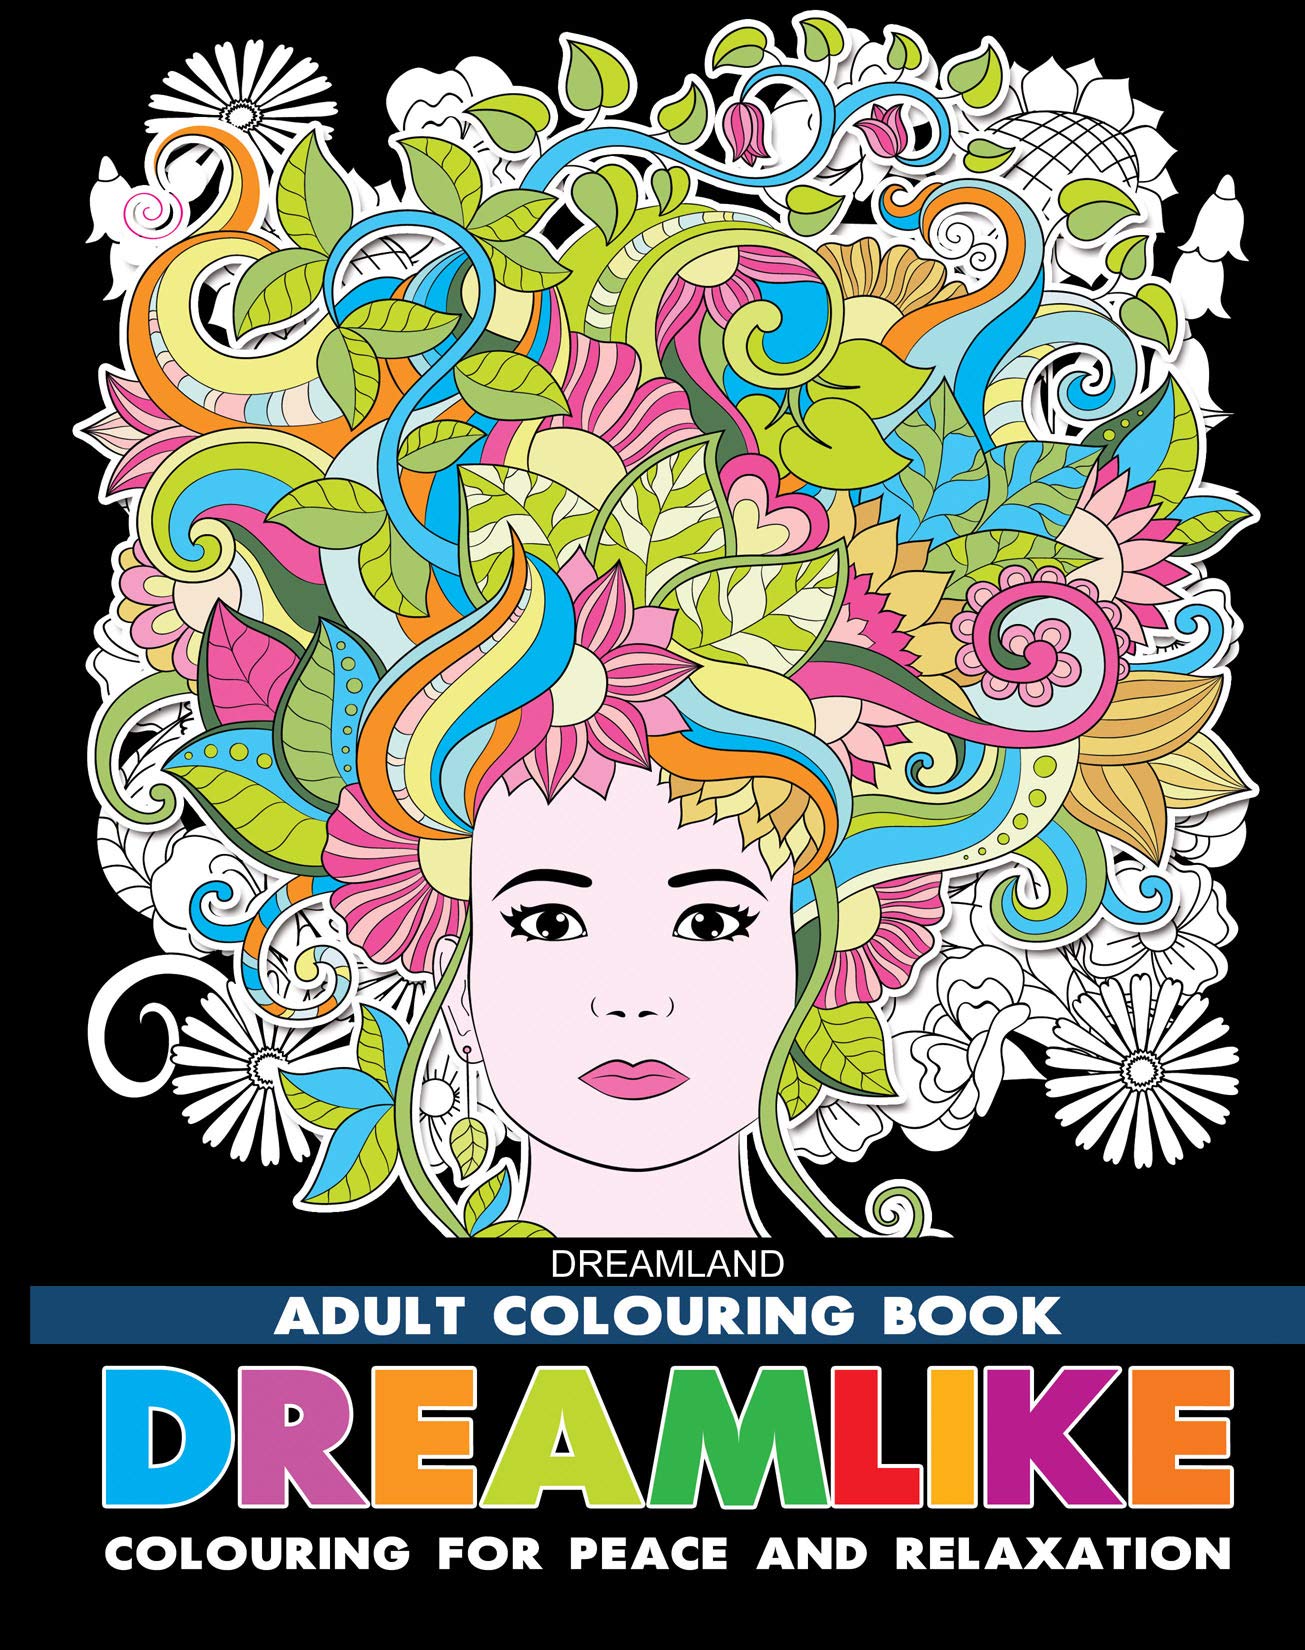 Dreamlike - Adult Colouring Book for Peace & Relaxation